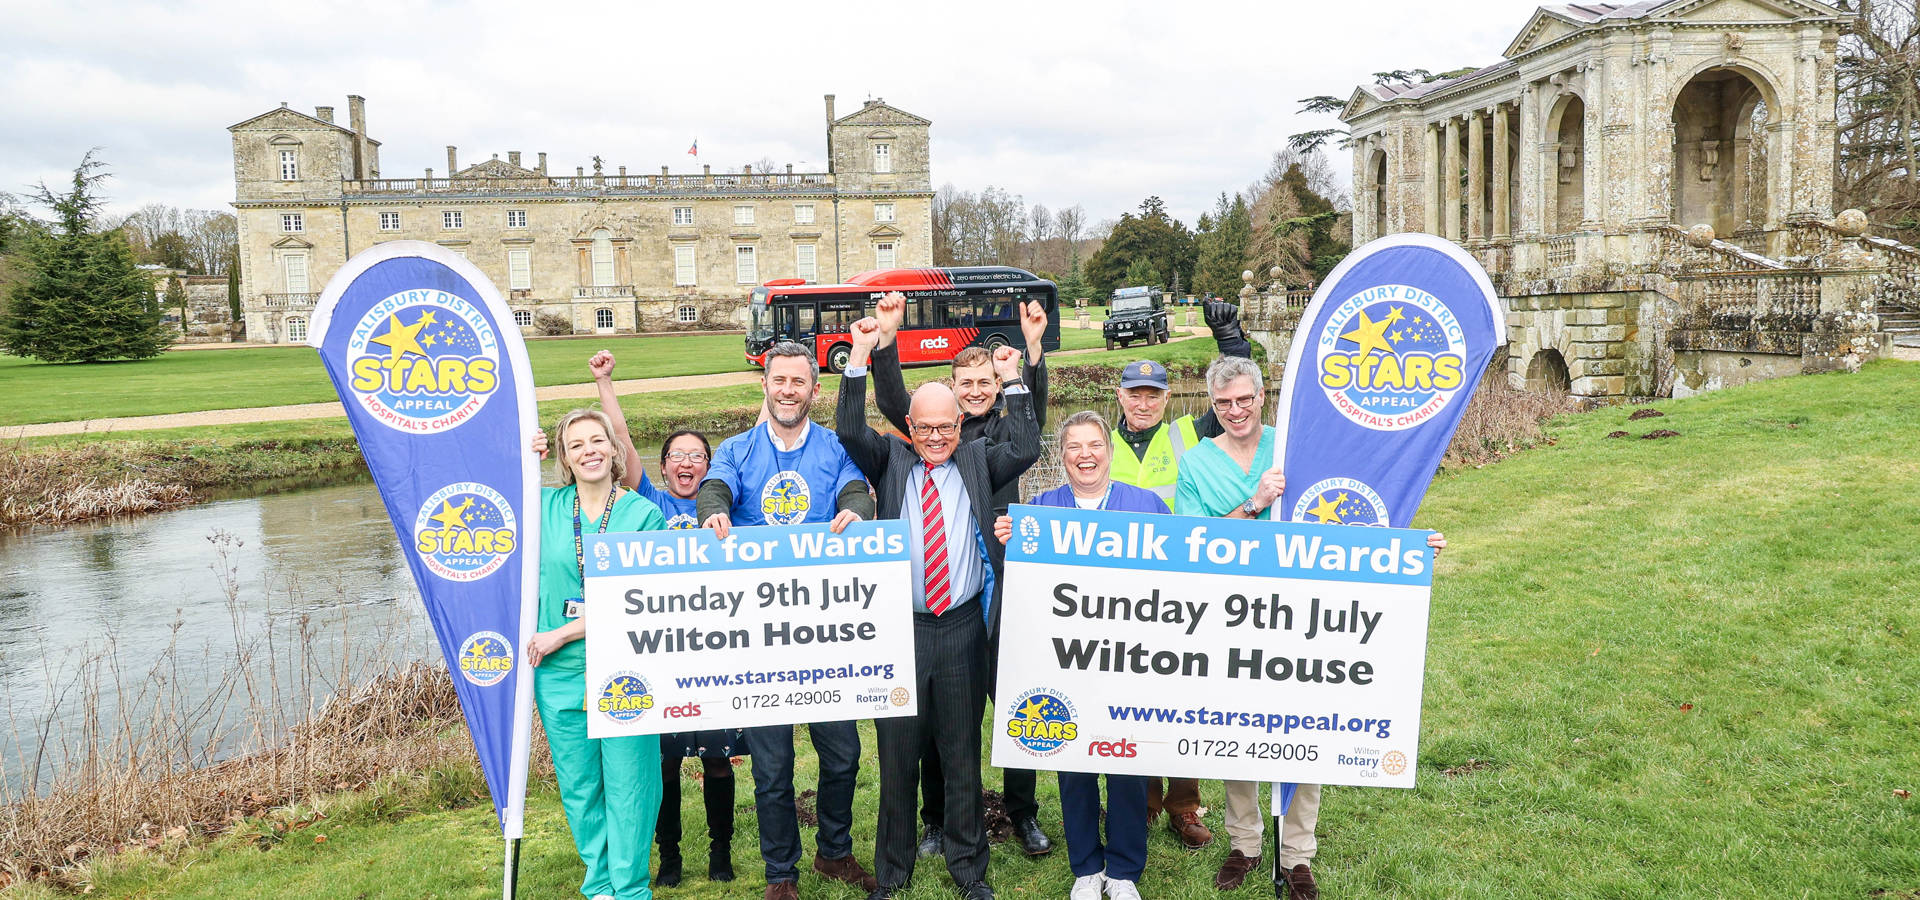 The launch of Walk for Wards 2023 at Wilton House with Lord Pembroke, President of the Stars Appeal, Stars Appeal Hospital Ambassadors, and representatives from Salisbury Reds and Wilton Rotary Club. Picture by Spencer Mulholland